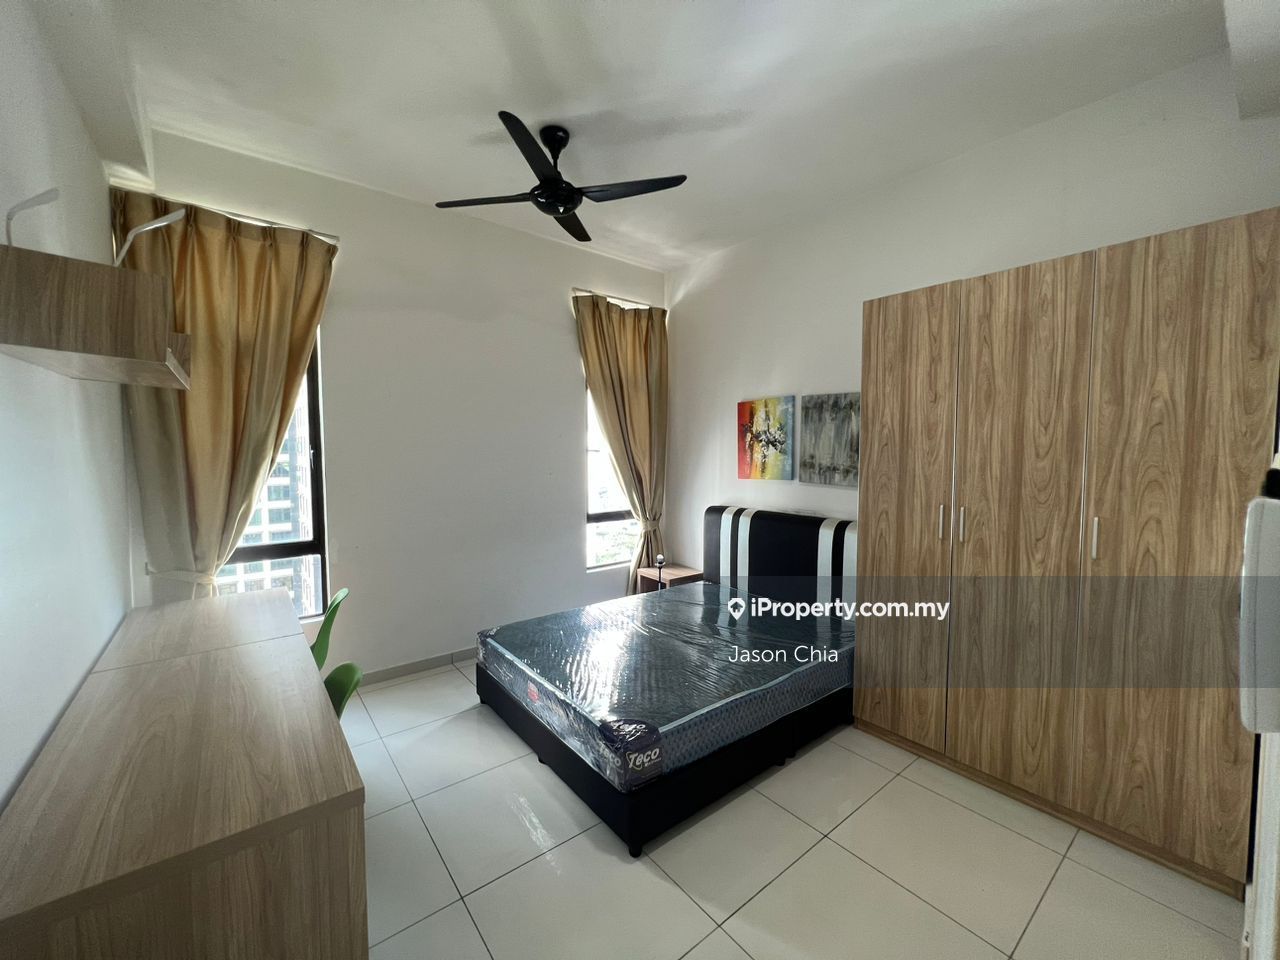 D'Summit Residences Serviced Residence 1 bedroom for rent in Skudai ...